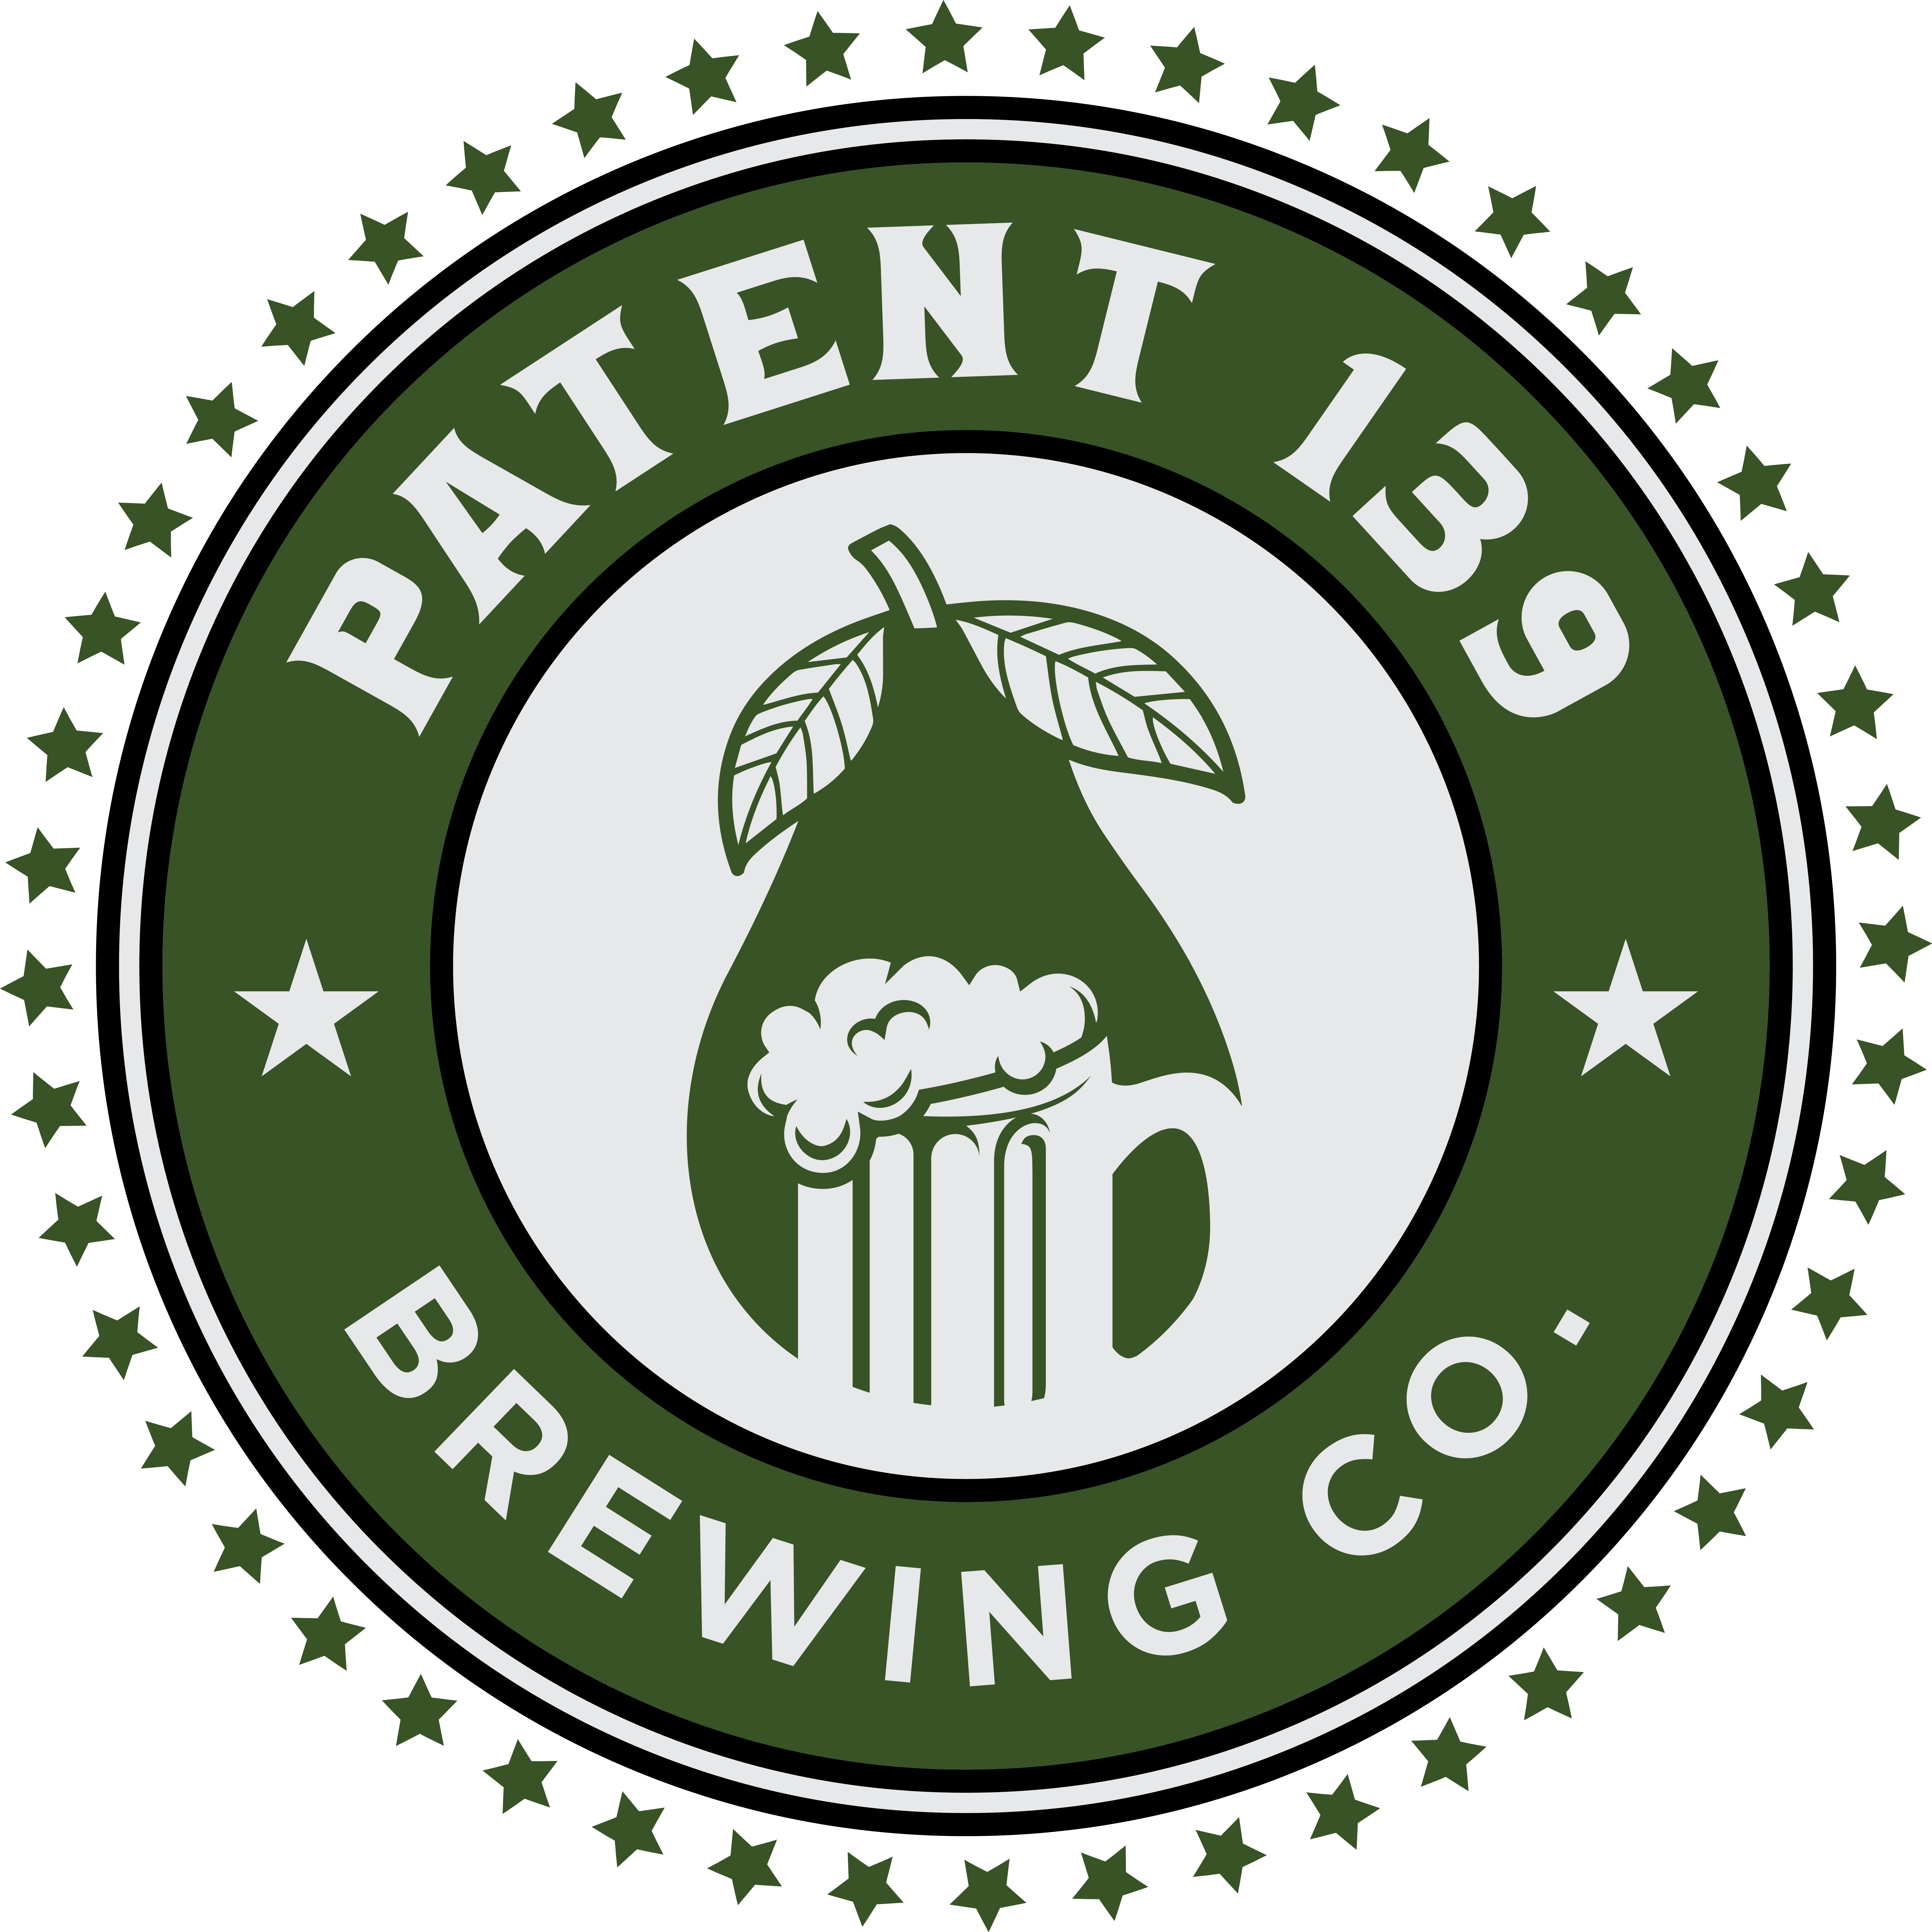 Patent 139 brewing co.